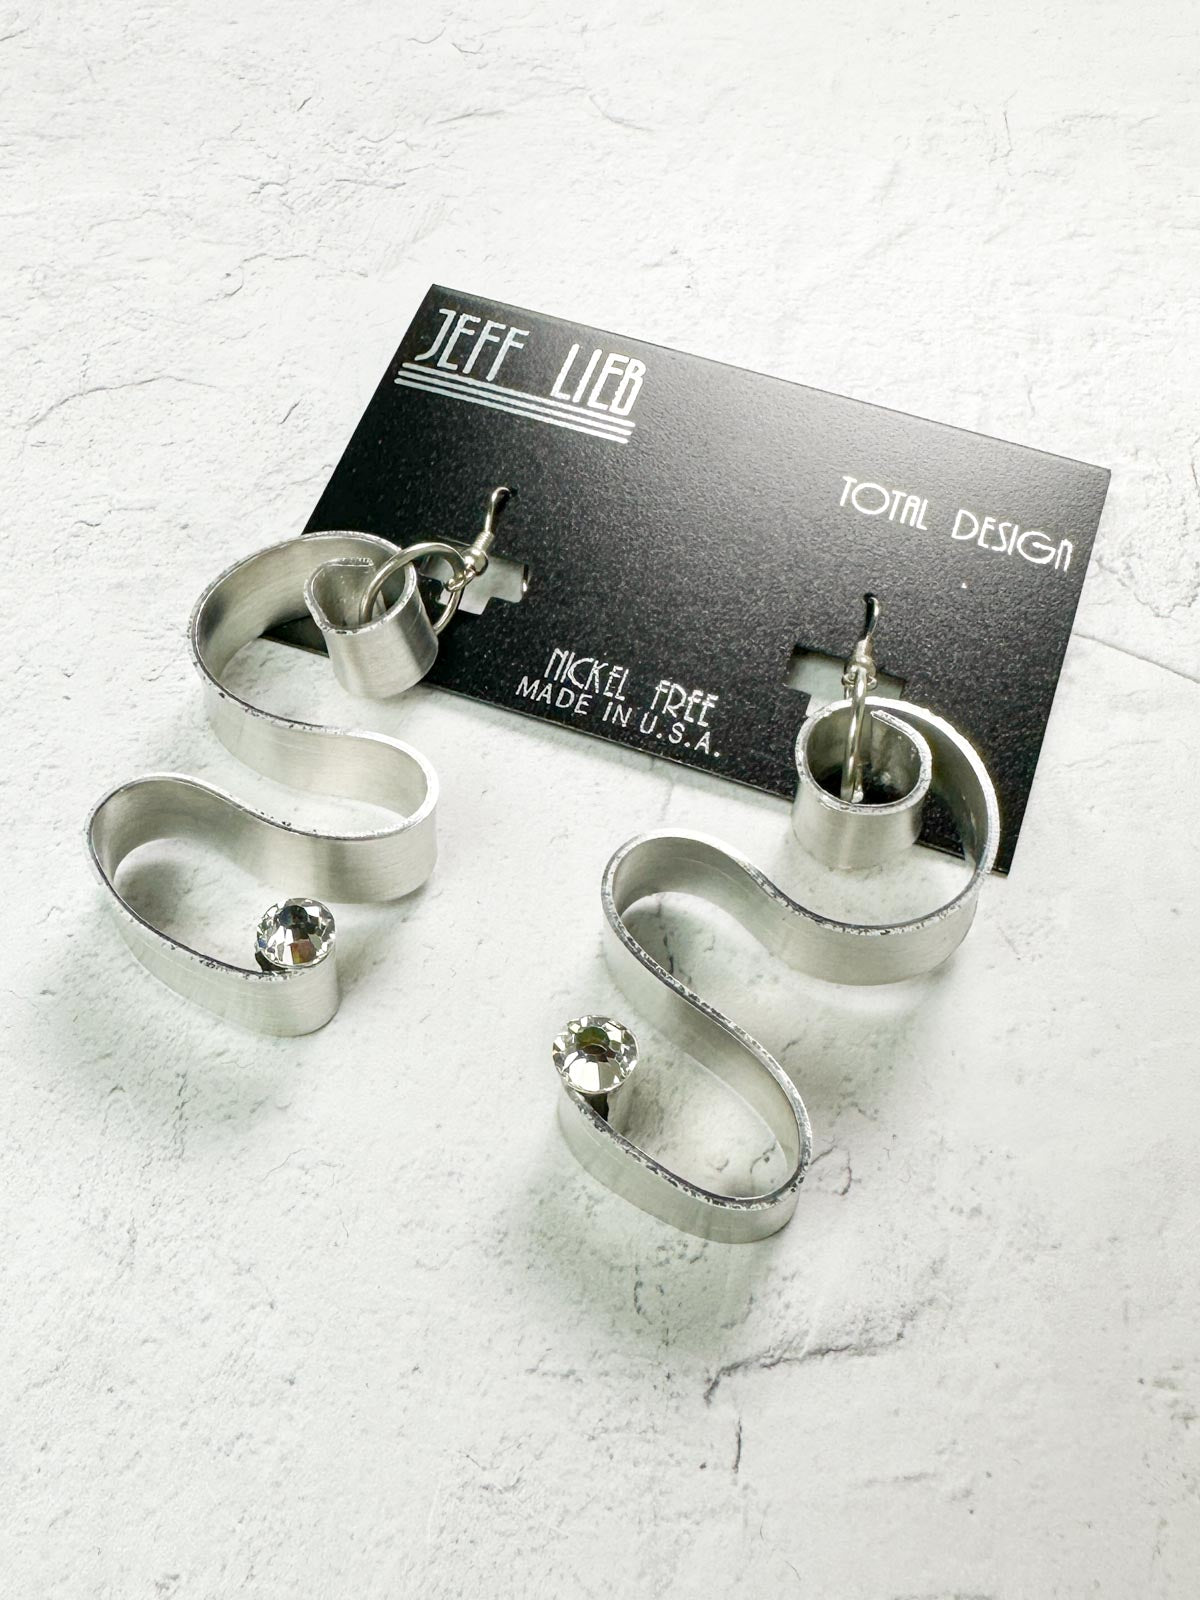 Jeff Lieb Total Design Jewelry Aluminum Bar Squiggle Earrings, Silver - Statement Boutique